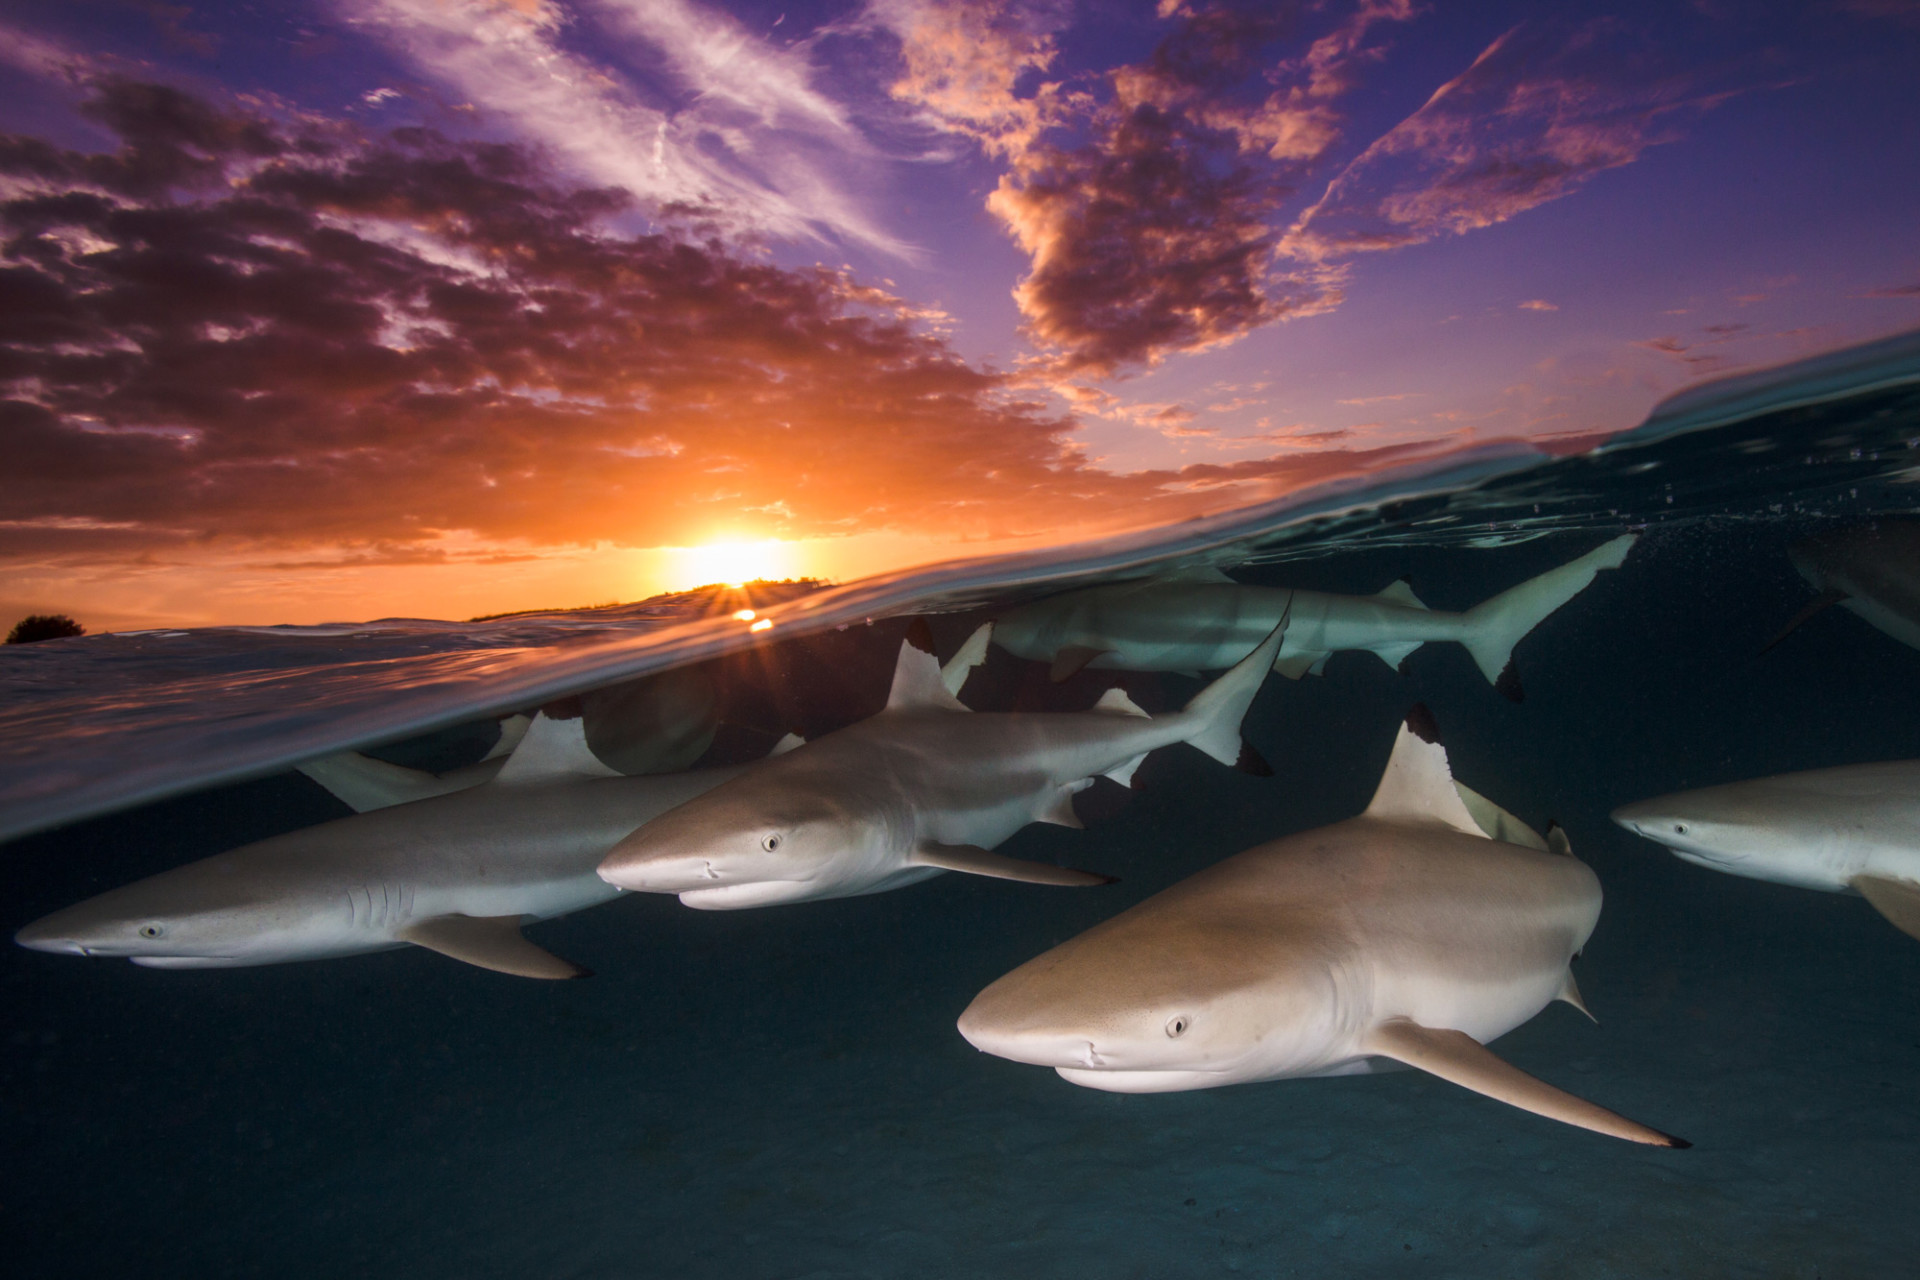 cool picture of Sharks at sunset